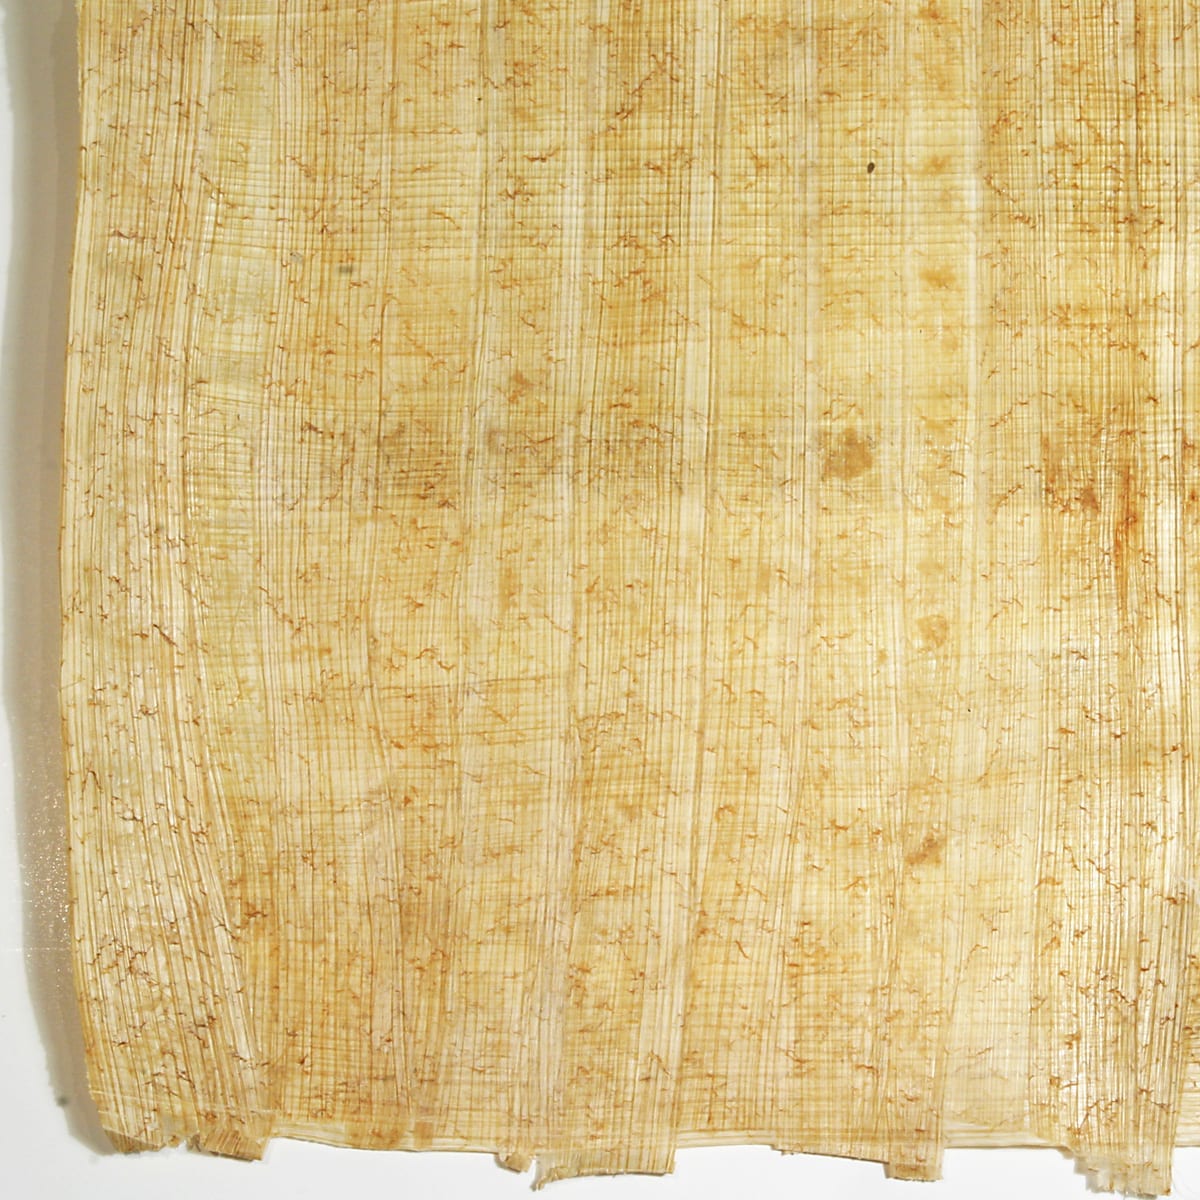 Ancient Egyptian Papyrus